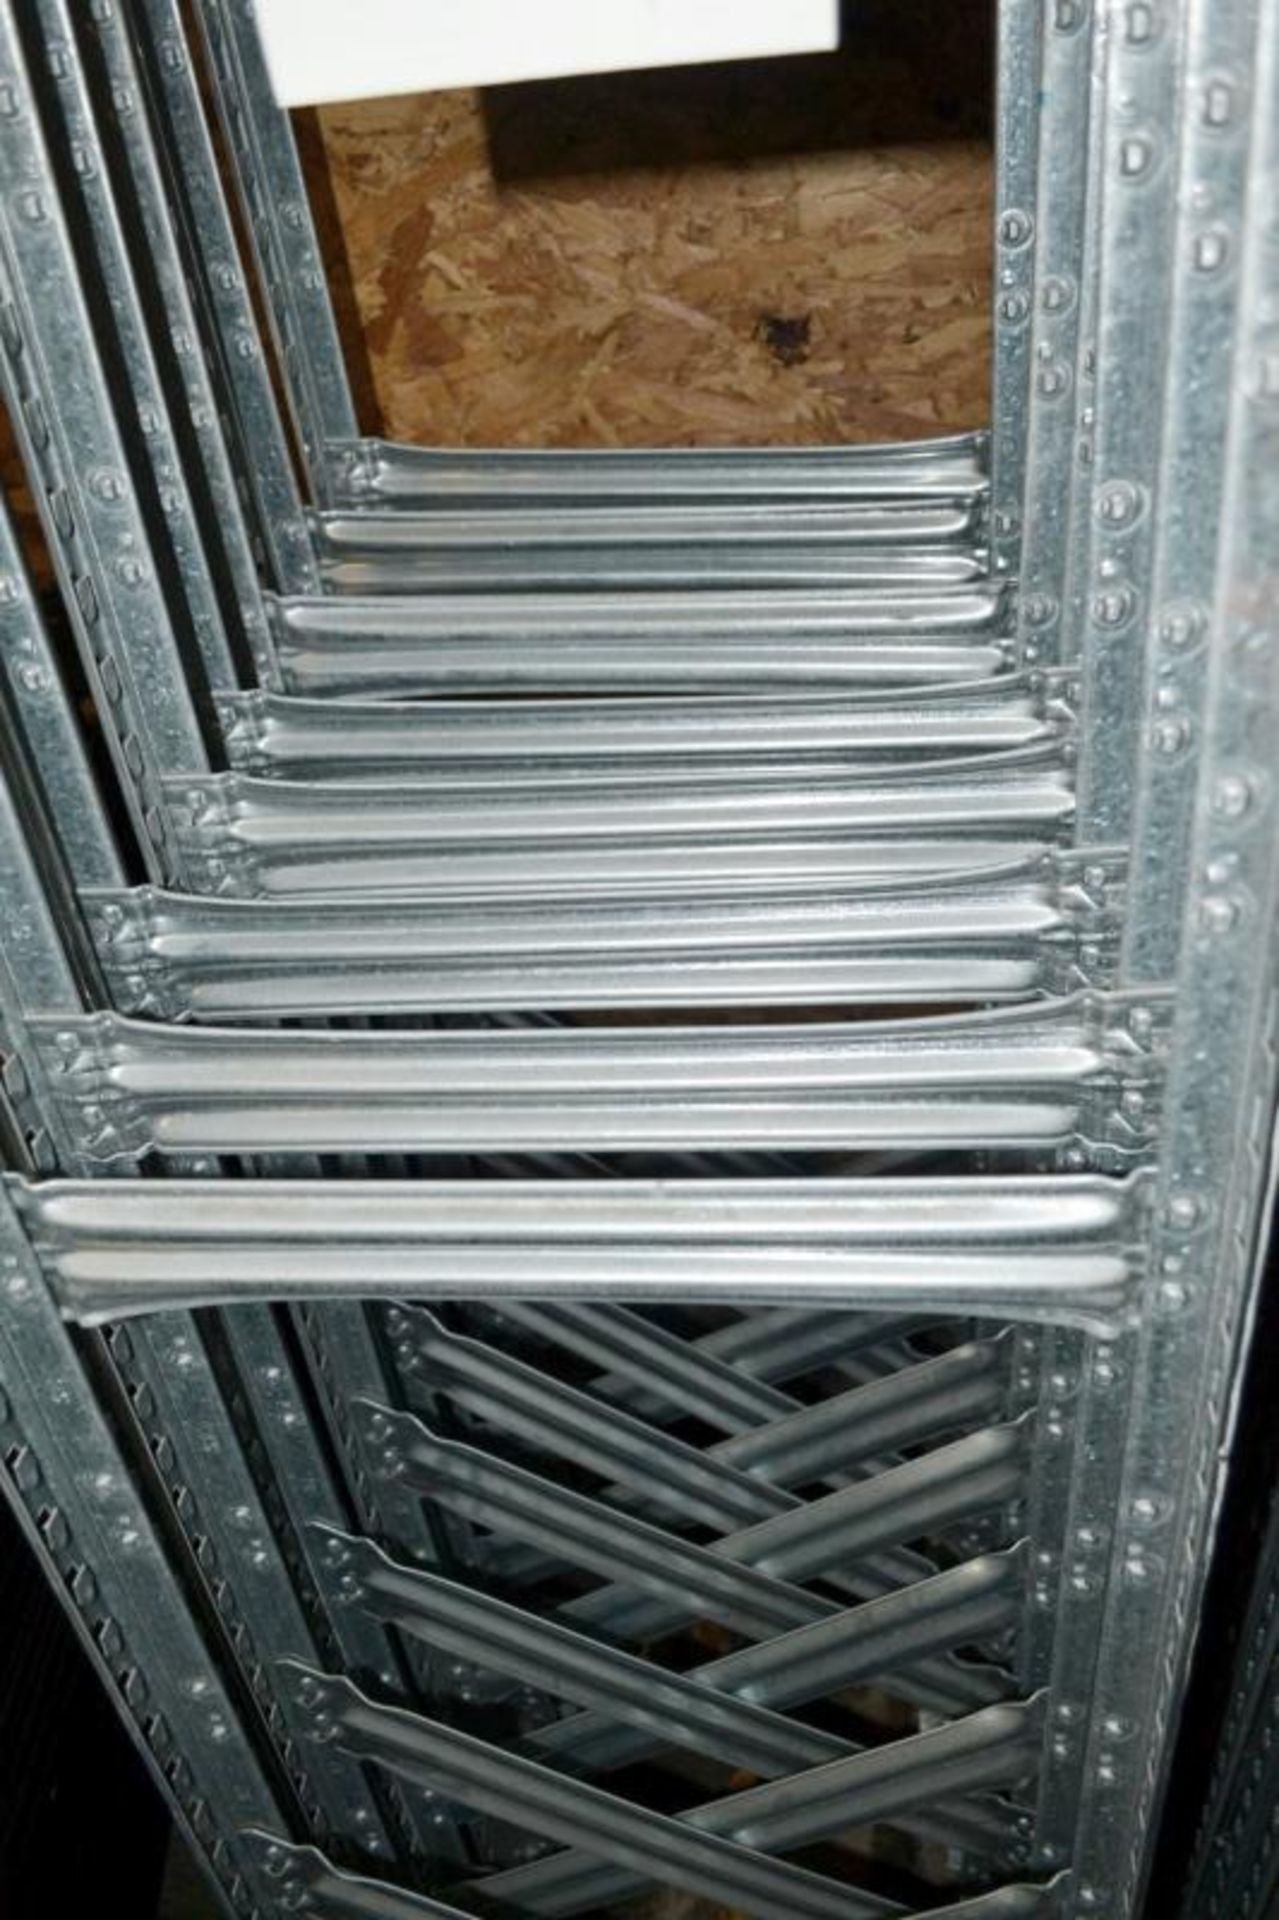 13 x Bays of Metalsistem Steel Modular Storage Shelving - Includes 28 Pieces - Recently Removed - Image 3 of 17